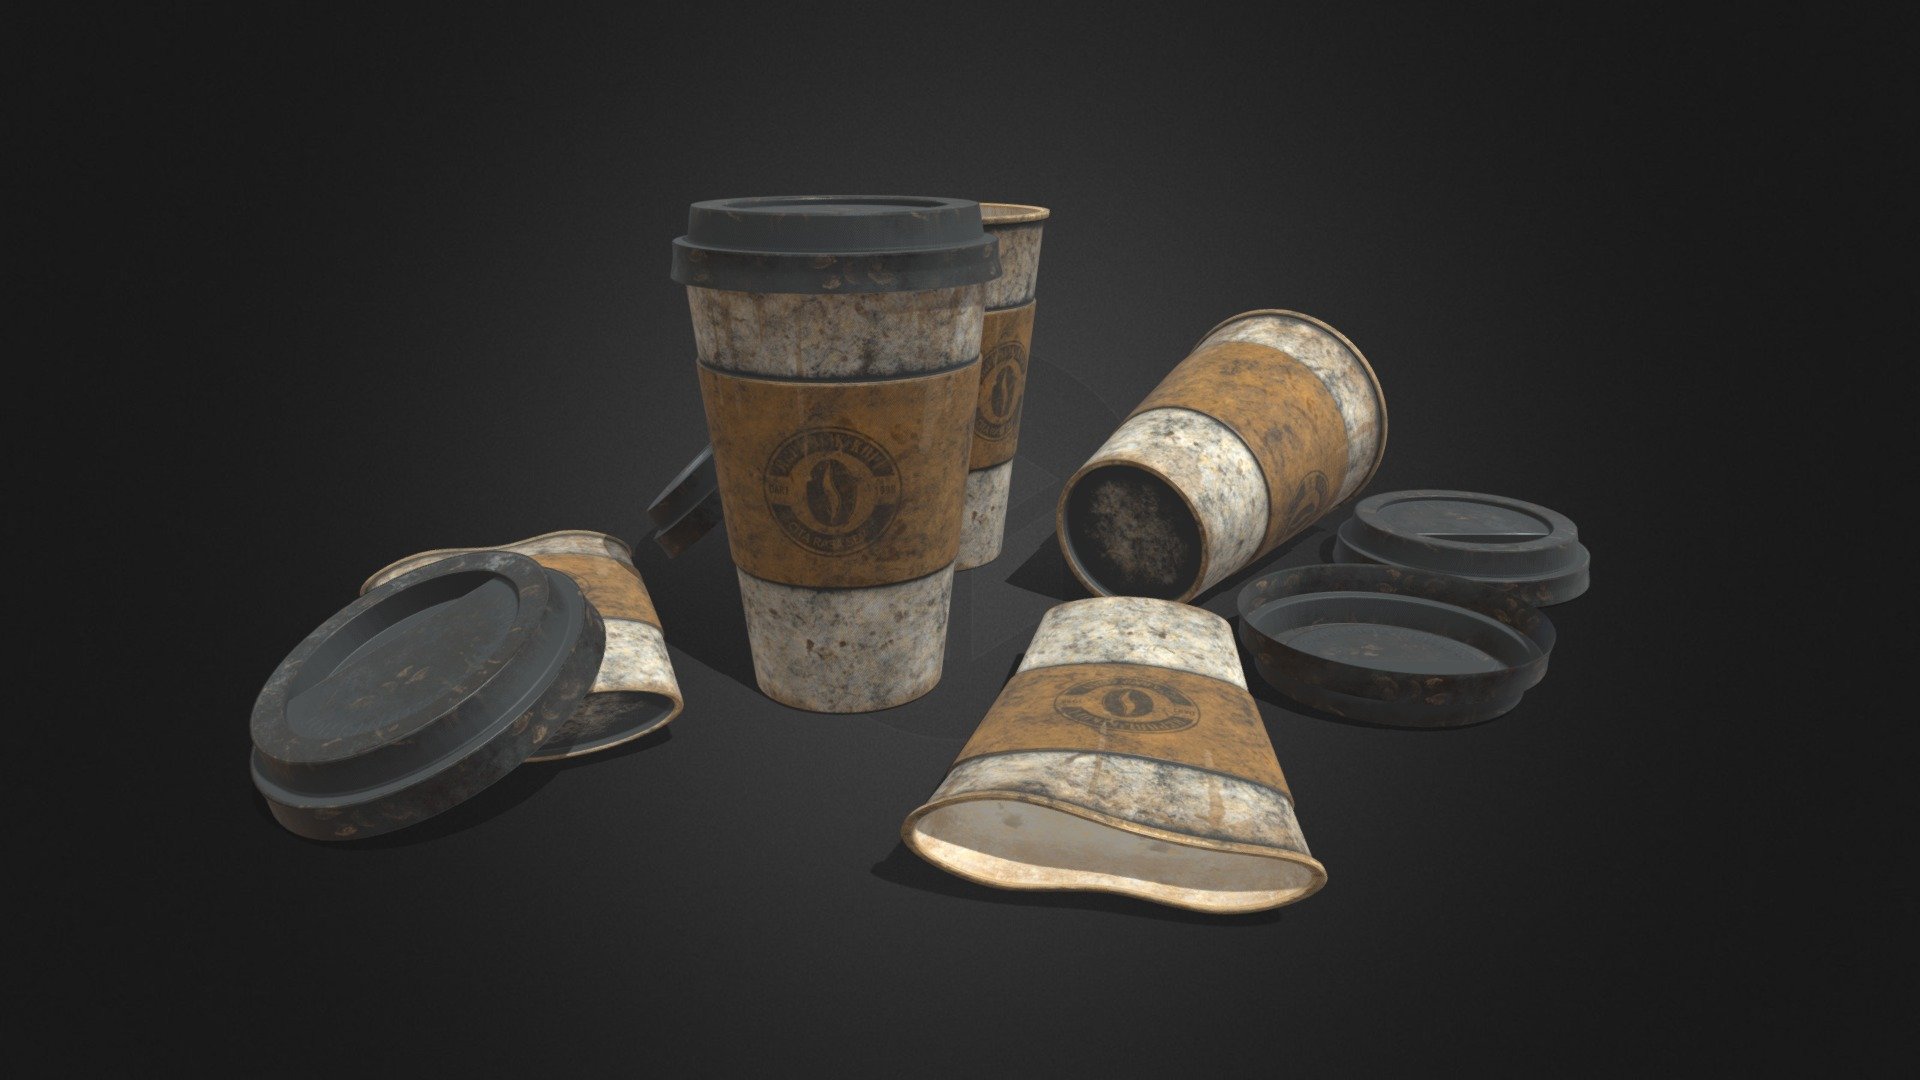 3D Photorealistic Low Poly models of Paper Coffe Cup. Models are all optimized for real-time render (Game, VR, AR, etc). Correctly scaled for an accurate representation in real world. Origins are set to bases of objects, and centre of the world. Models includes 4 LODs (LOD0, LOD1, LOD2, LOD3) and 2 PBR textures variations (clean and dirty). Label using non-existing company name. Cup and the lid are separate objects that can be moved.


Created with Blender 3.3.1
Textured in Substance Painter
Format : blend, fbx, obj
Polycounts :
- 4544 tris (LOD0)
- 2176 tris (LOD1)
- 1064 tris (LOD2)
- 408 tris (LOD3)
Textures :
- 2K PBR textures in PNG format
- Base color/Albedo 
- Normal (OpenGL &amp;amp; DirectX)
- Roughness
- AO (Ambient Oclussion)
Channel-packed textures :
- ARM :
- -A = Ambient Oclussion, Red channel
- -R = Roughness, Green channel
- Clean and dirty texture variationS
 - Paper Coffe Cup Low Poly 3D Model - Buy Royalty Free 3D model by LiquidPixel (@liquid_pixel) 3d model